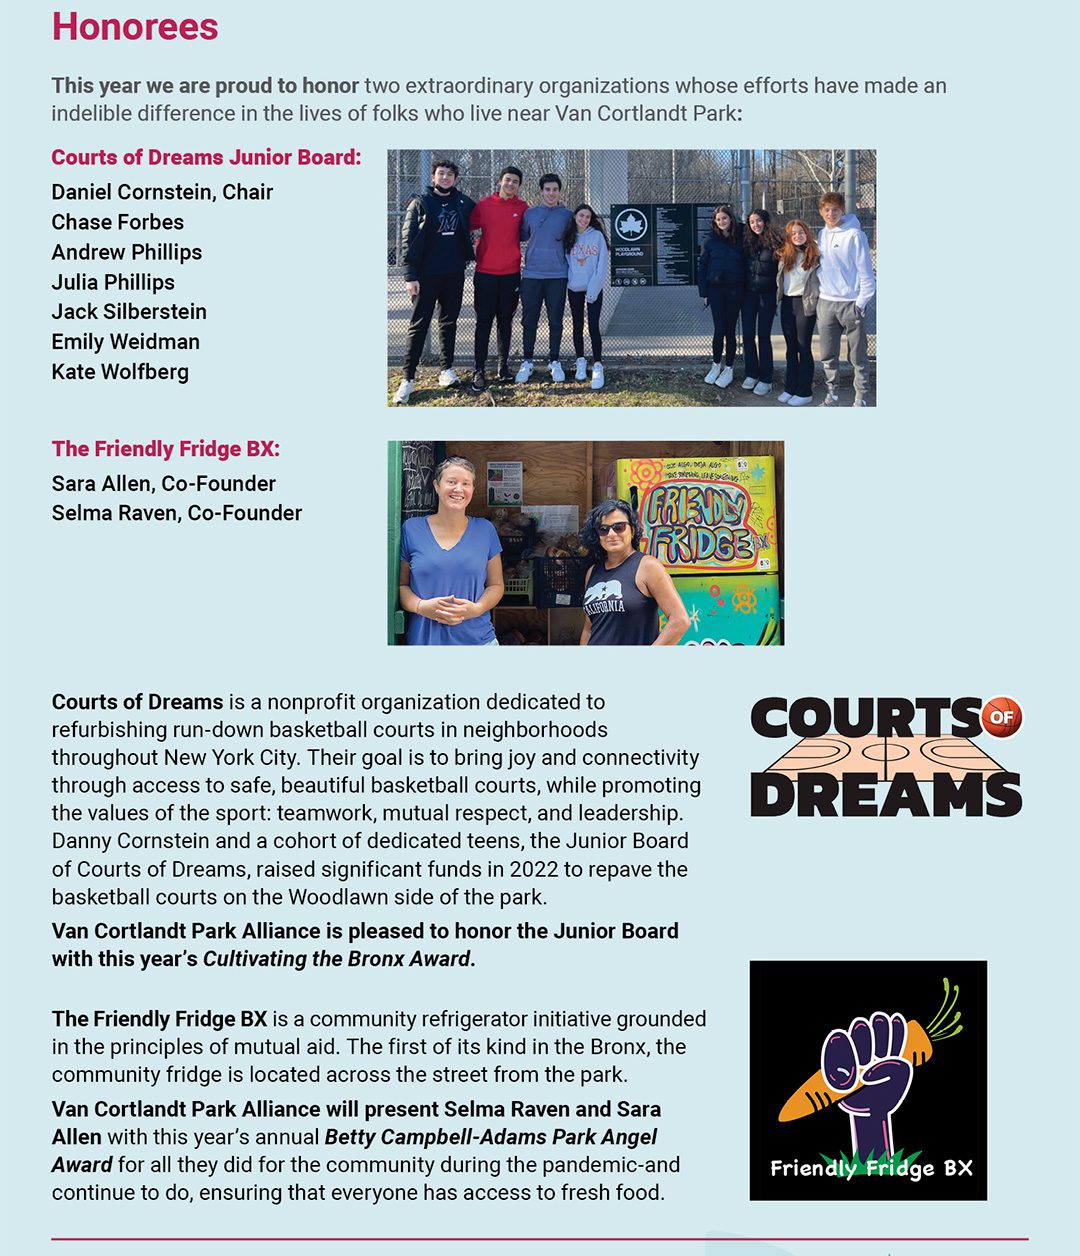 A flyer for the court of dreams.